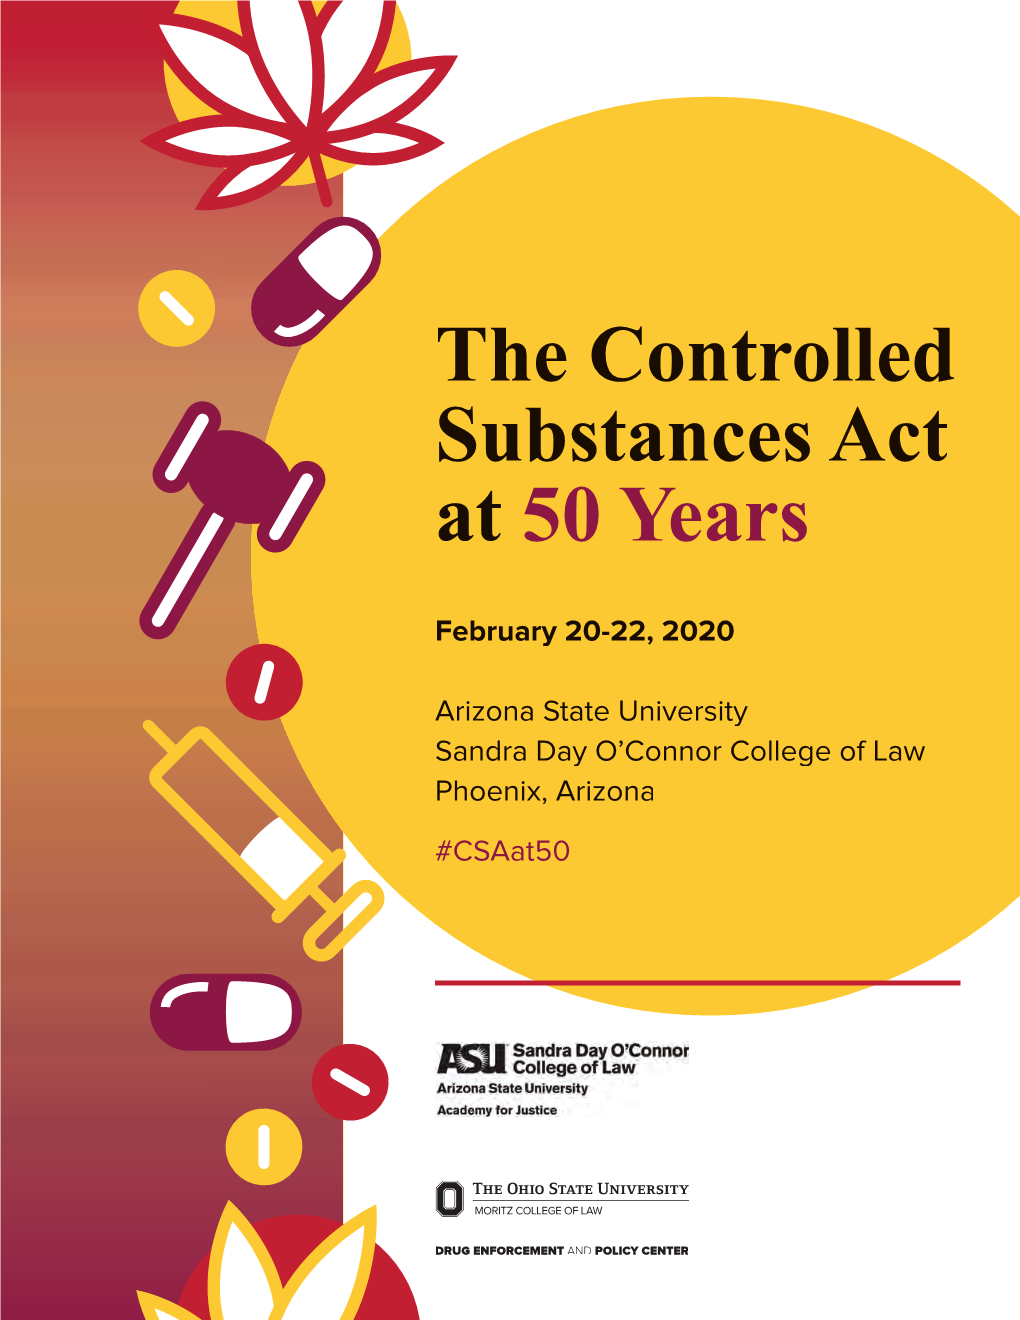 The Controlled Substances Act at 50 Years